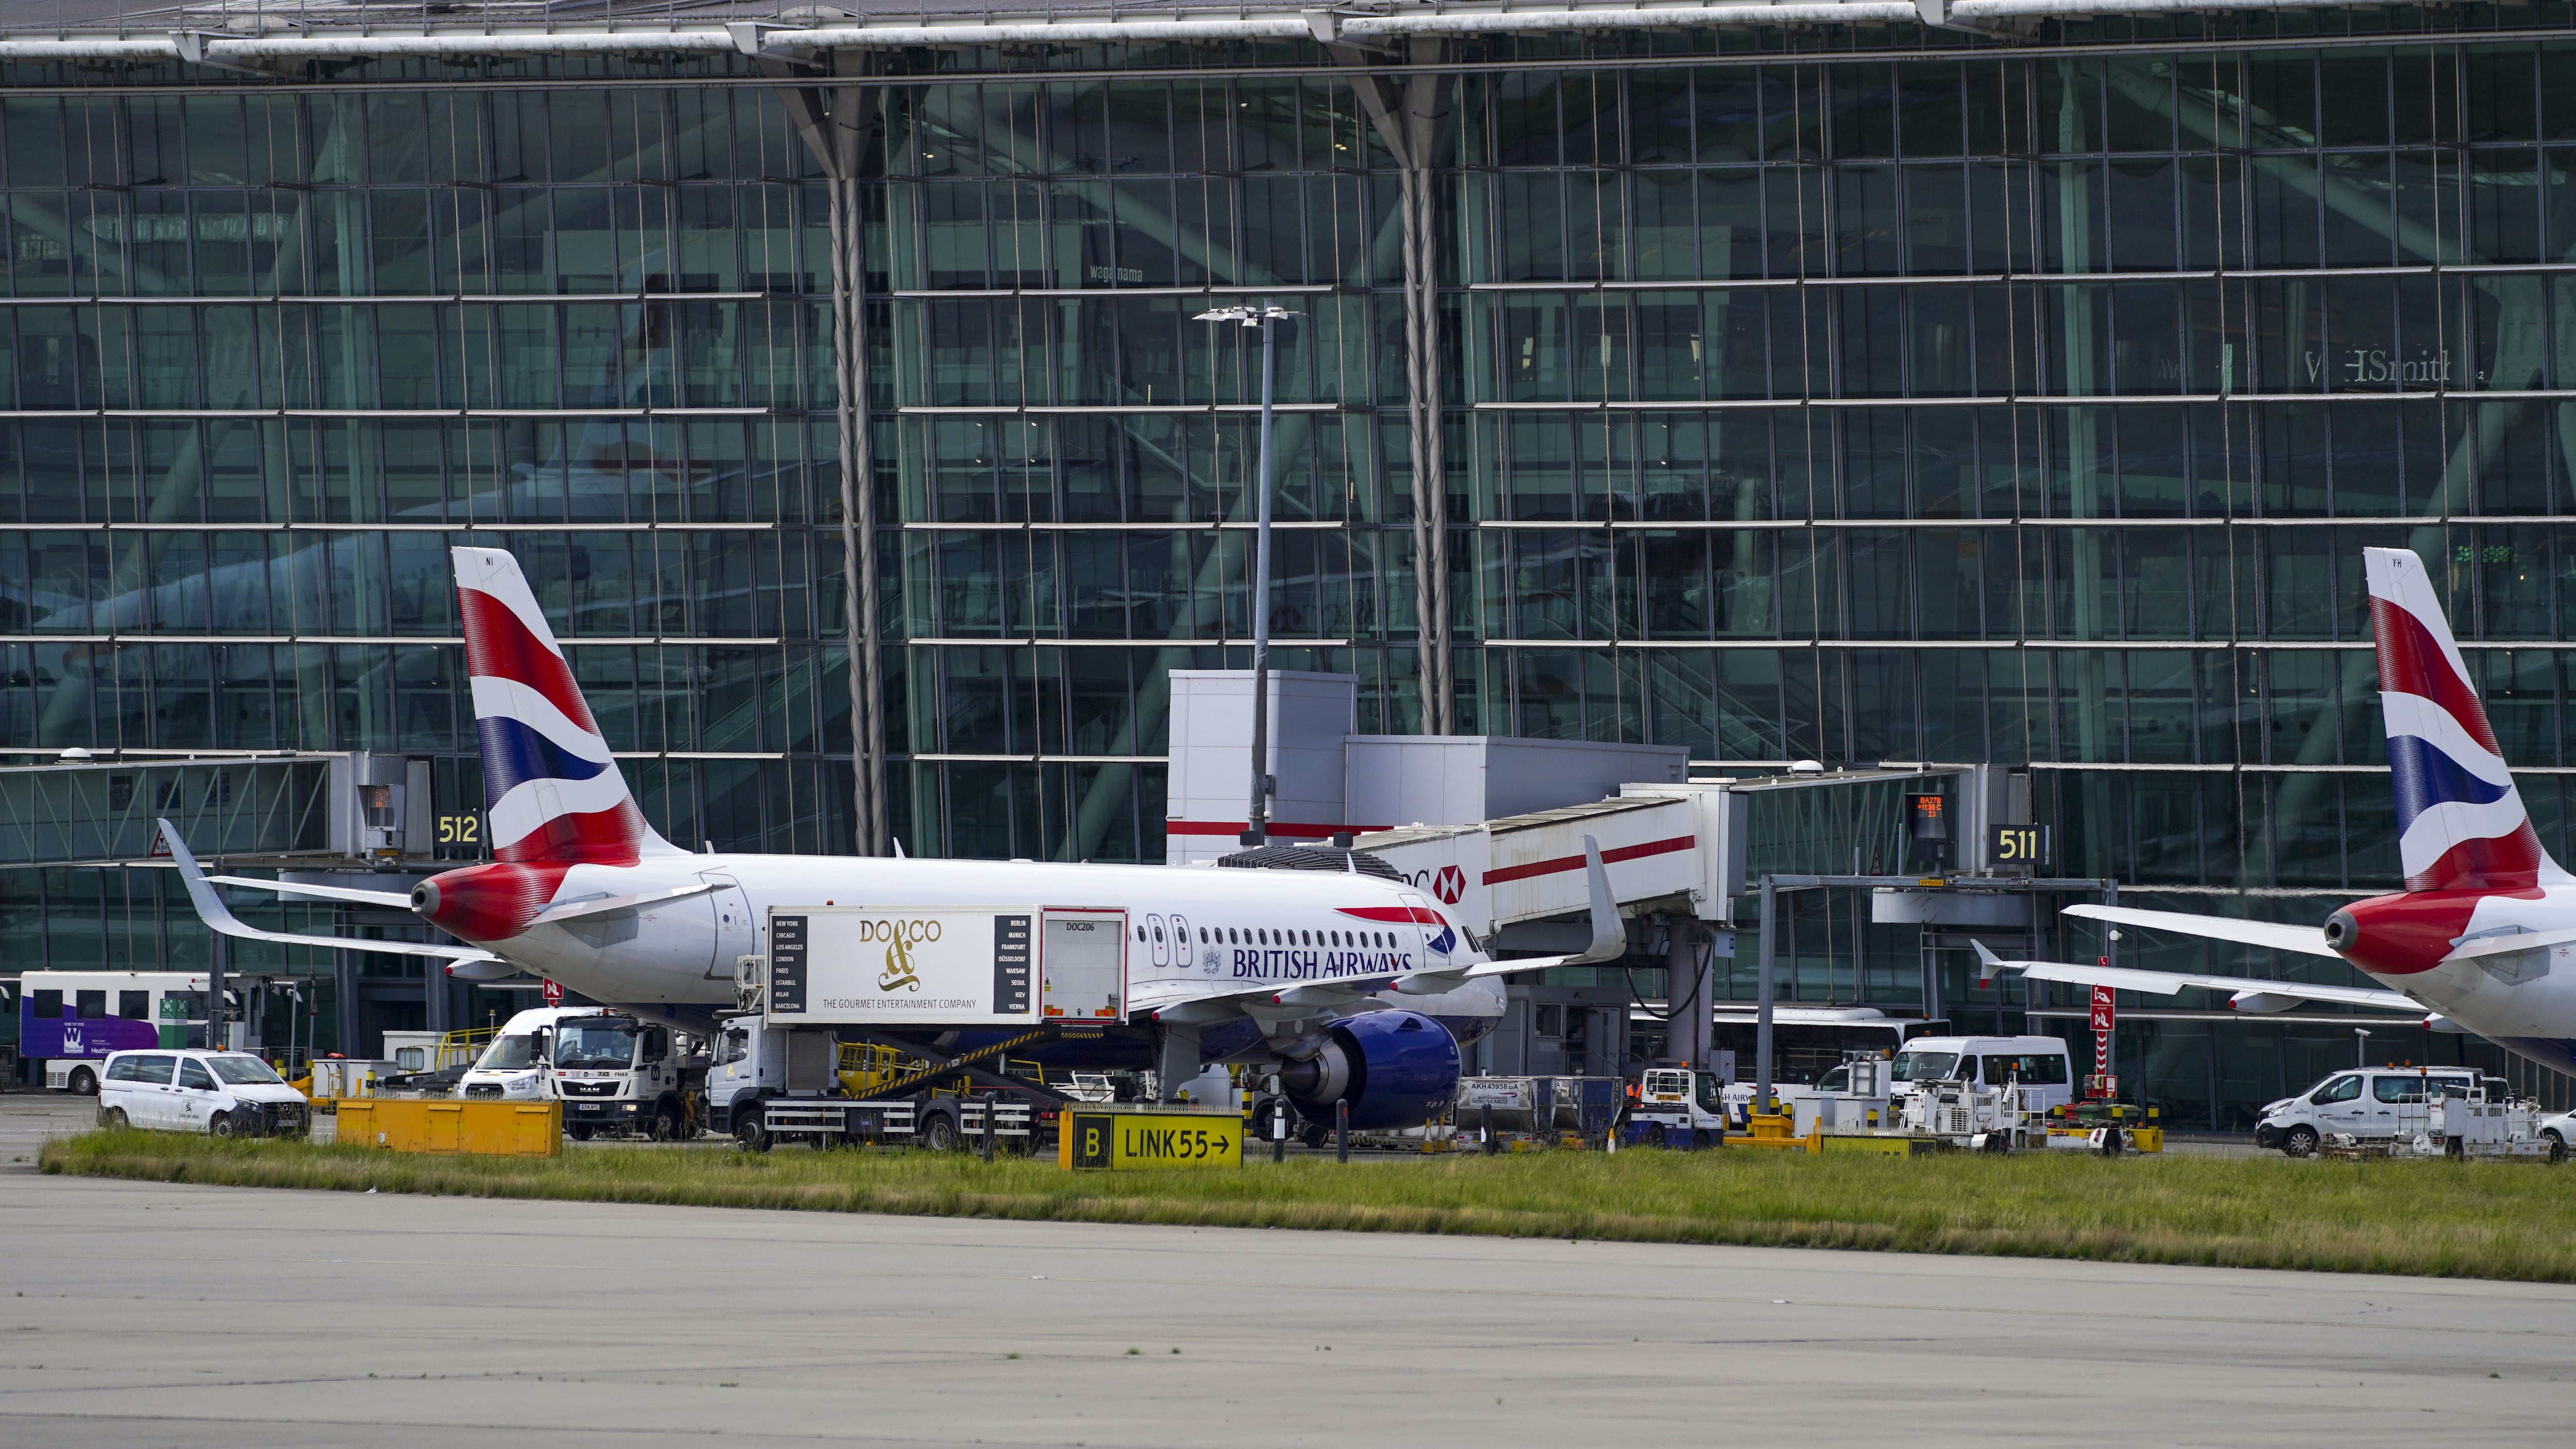 Heathrow is forecasting record passenger numbers this year